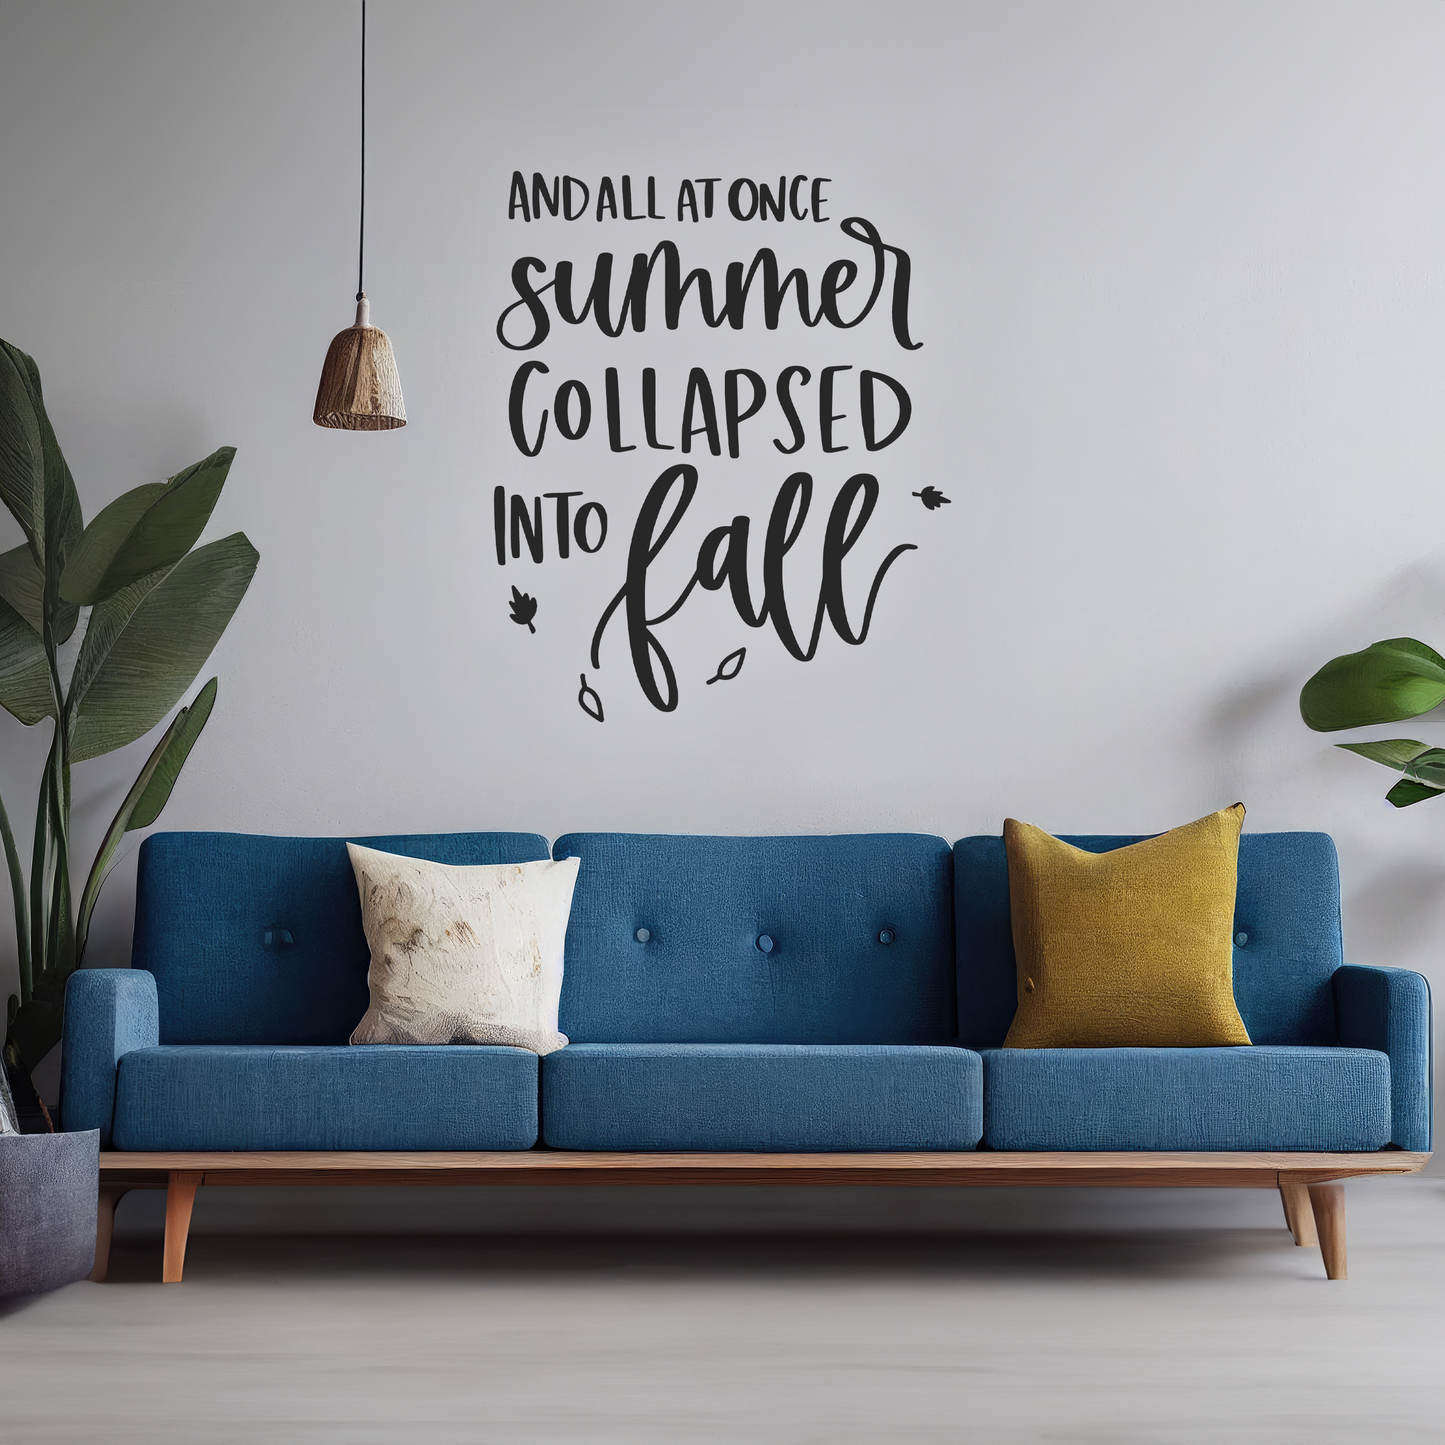 And All At Once Summer Collapsed Into Fall Wall Sticker Decal